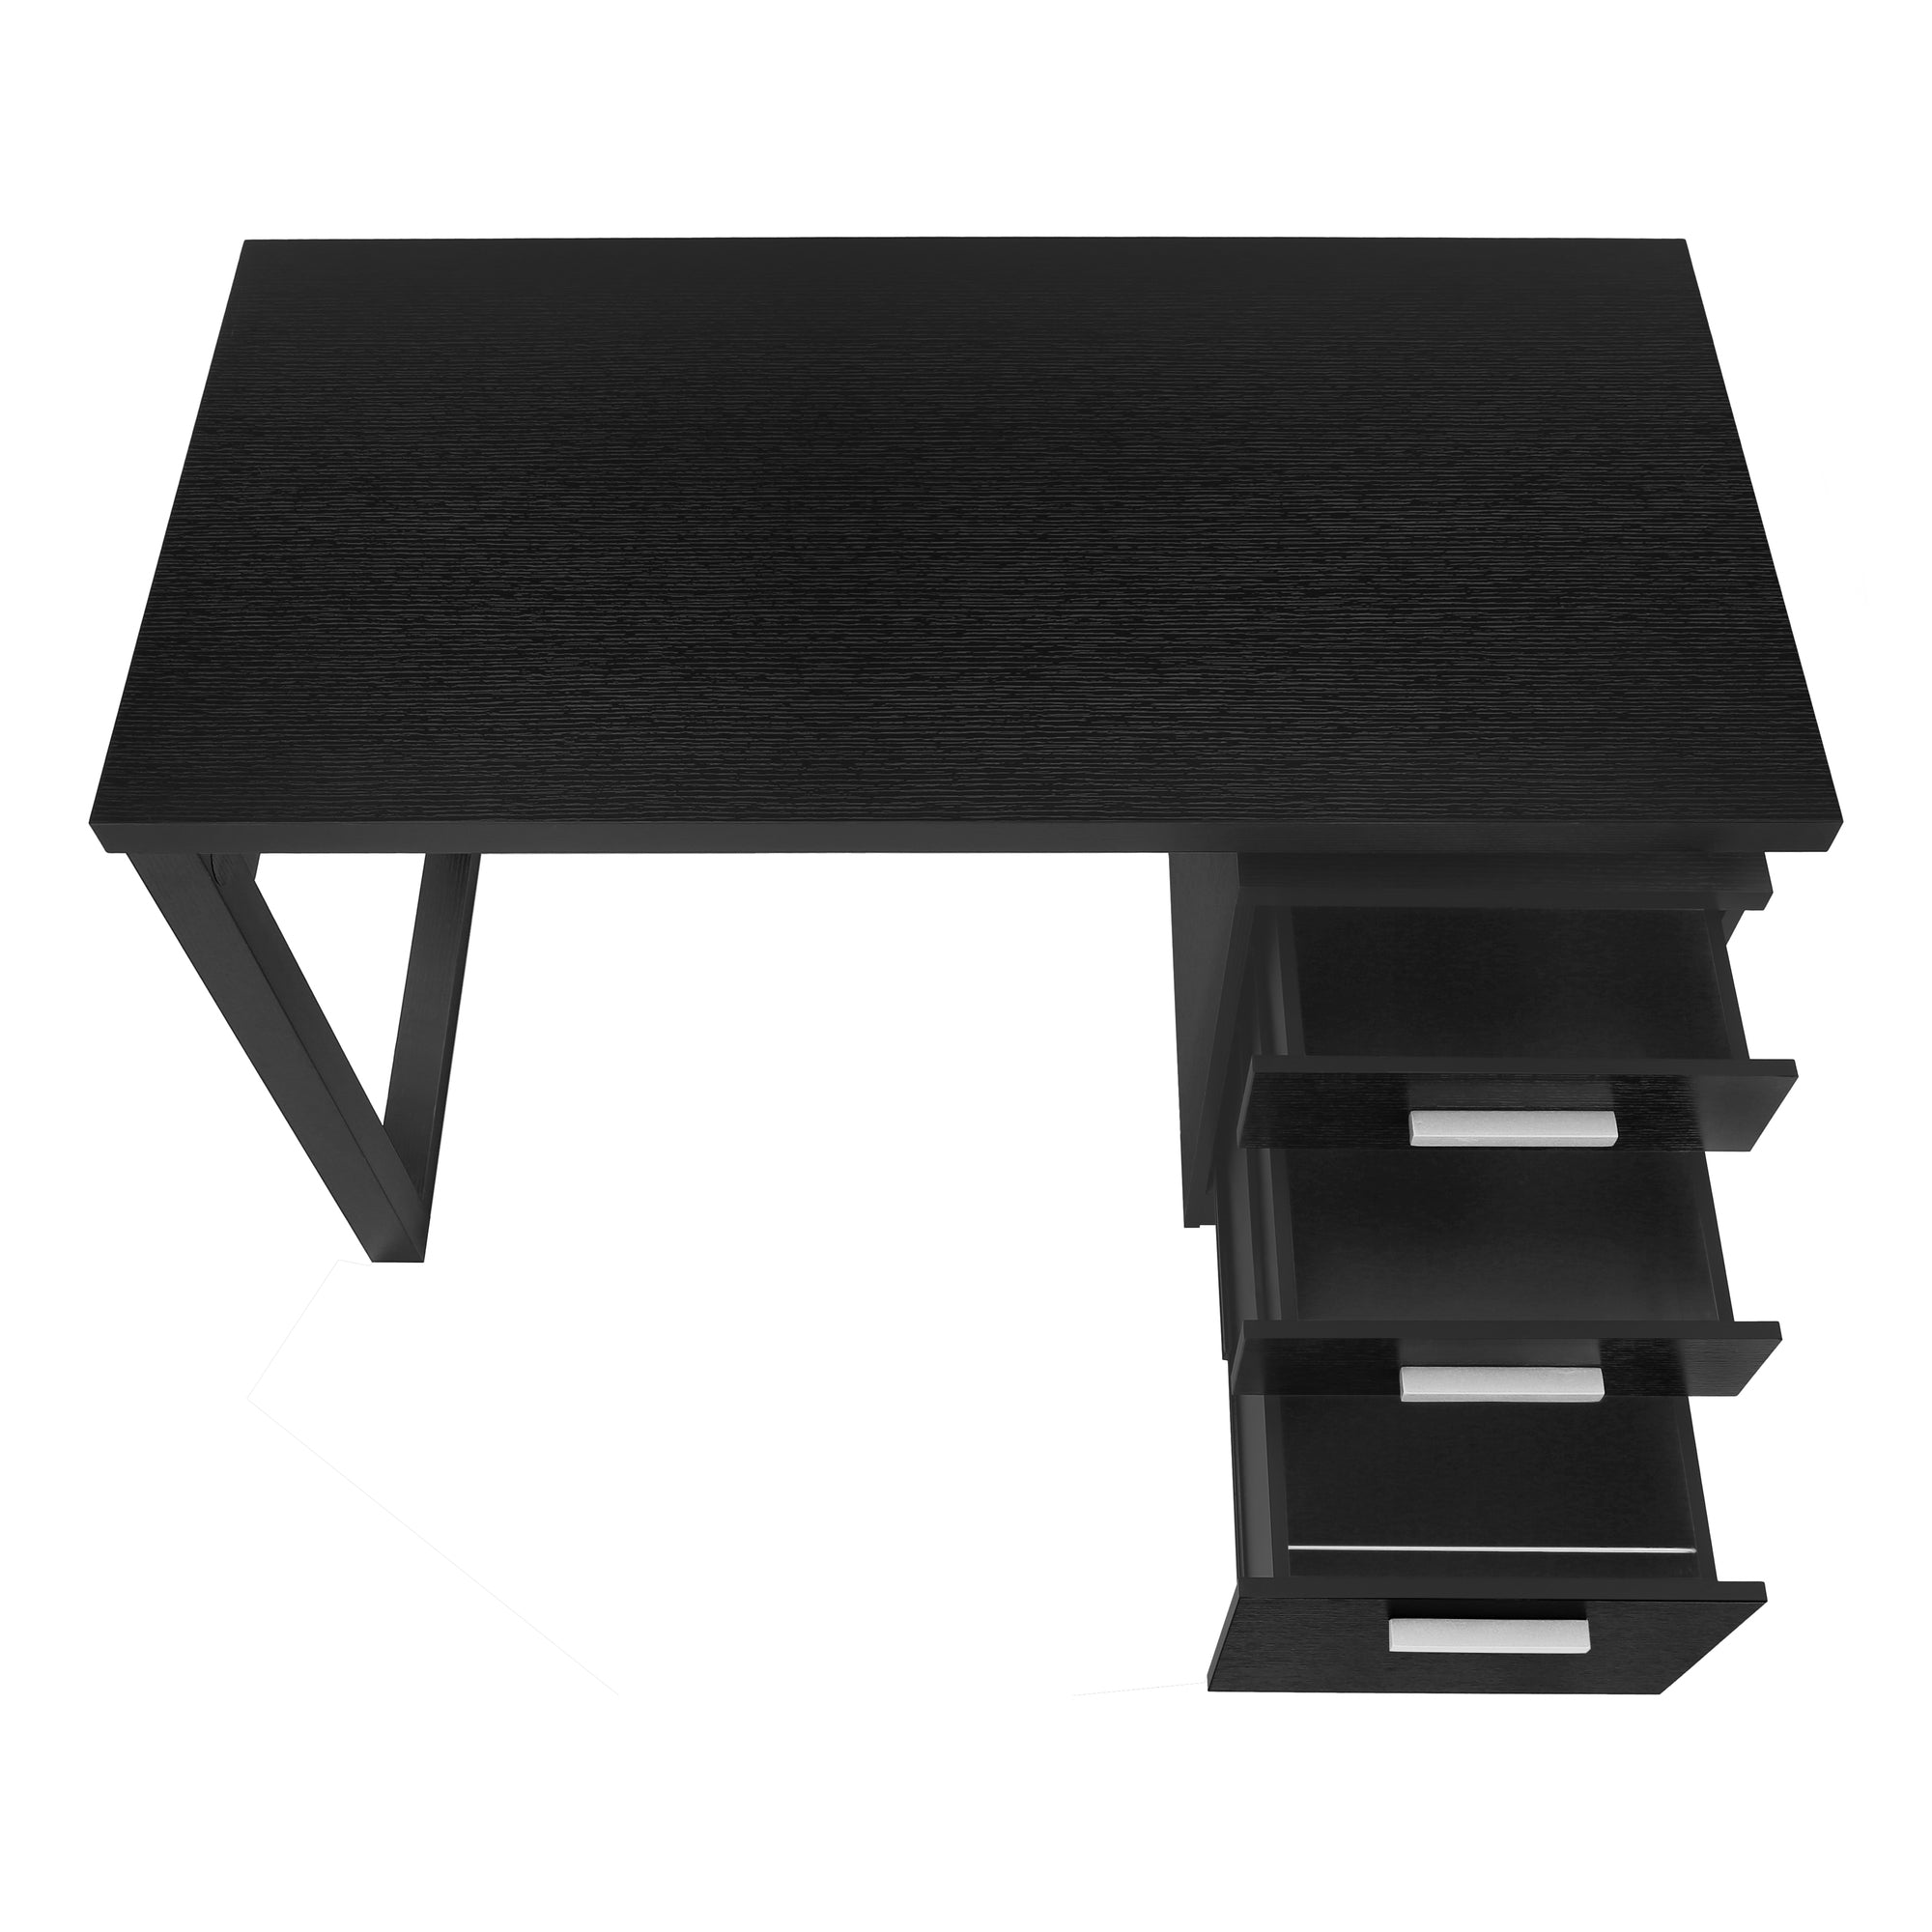 MN-807691    Computer Desk, Home Office, Laptop, Left, Right Set-Up, Storage Drawers, 48"L, Metal, Laminate, Black, Contemporary, Modern